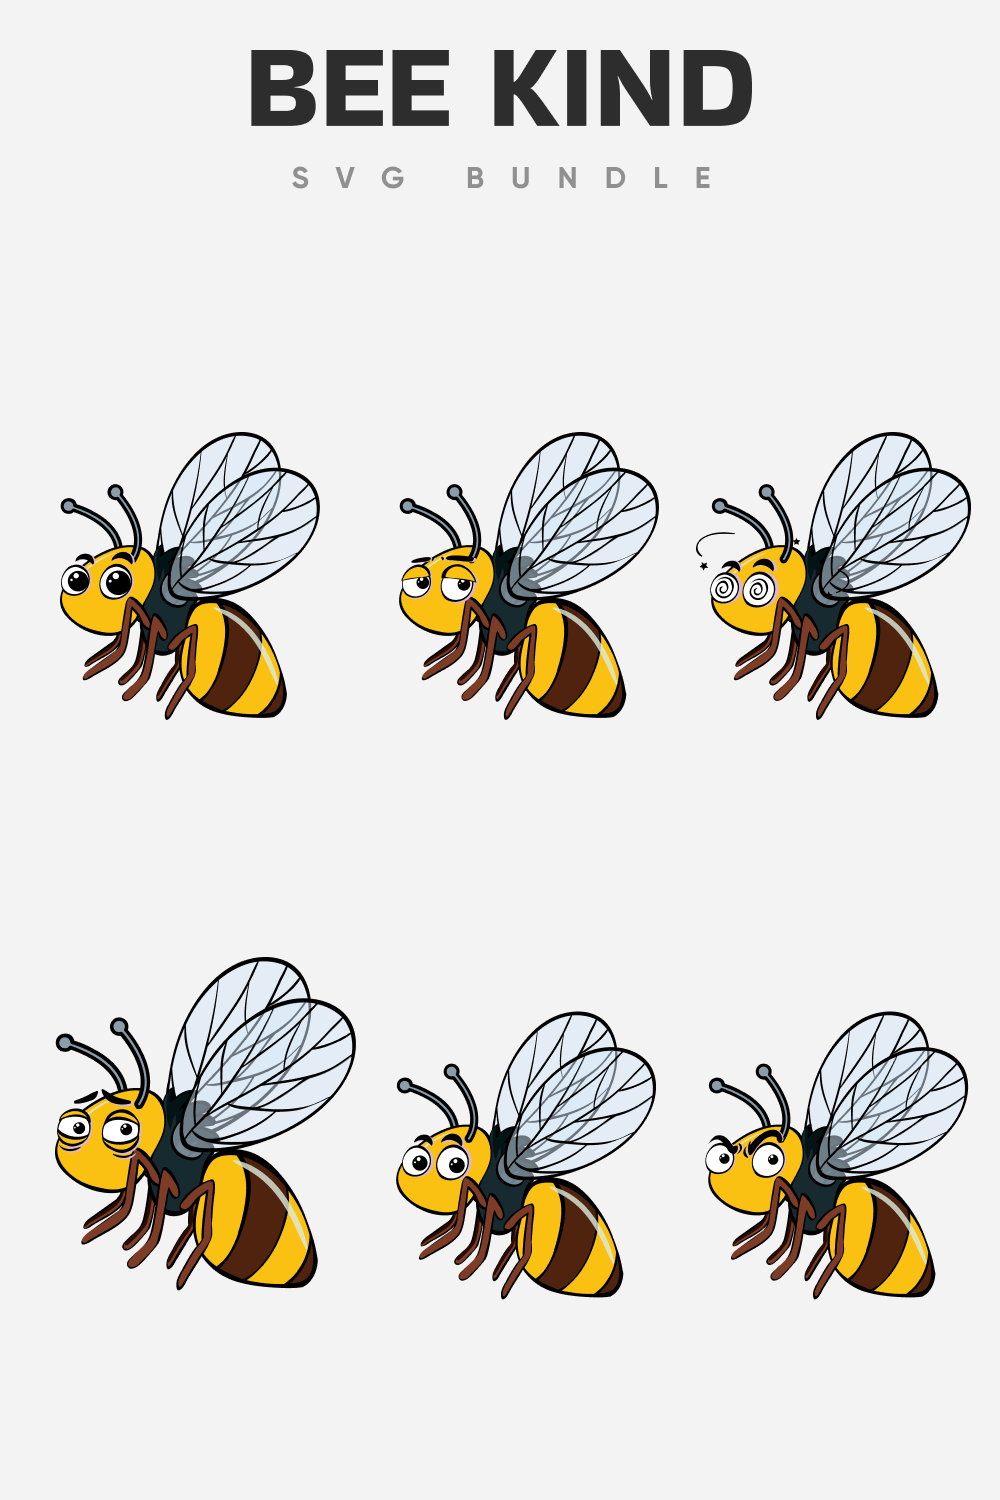 Bright bee in different conditions.